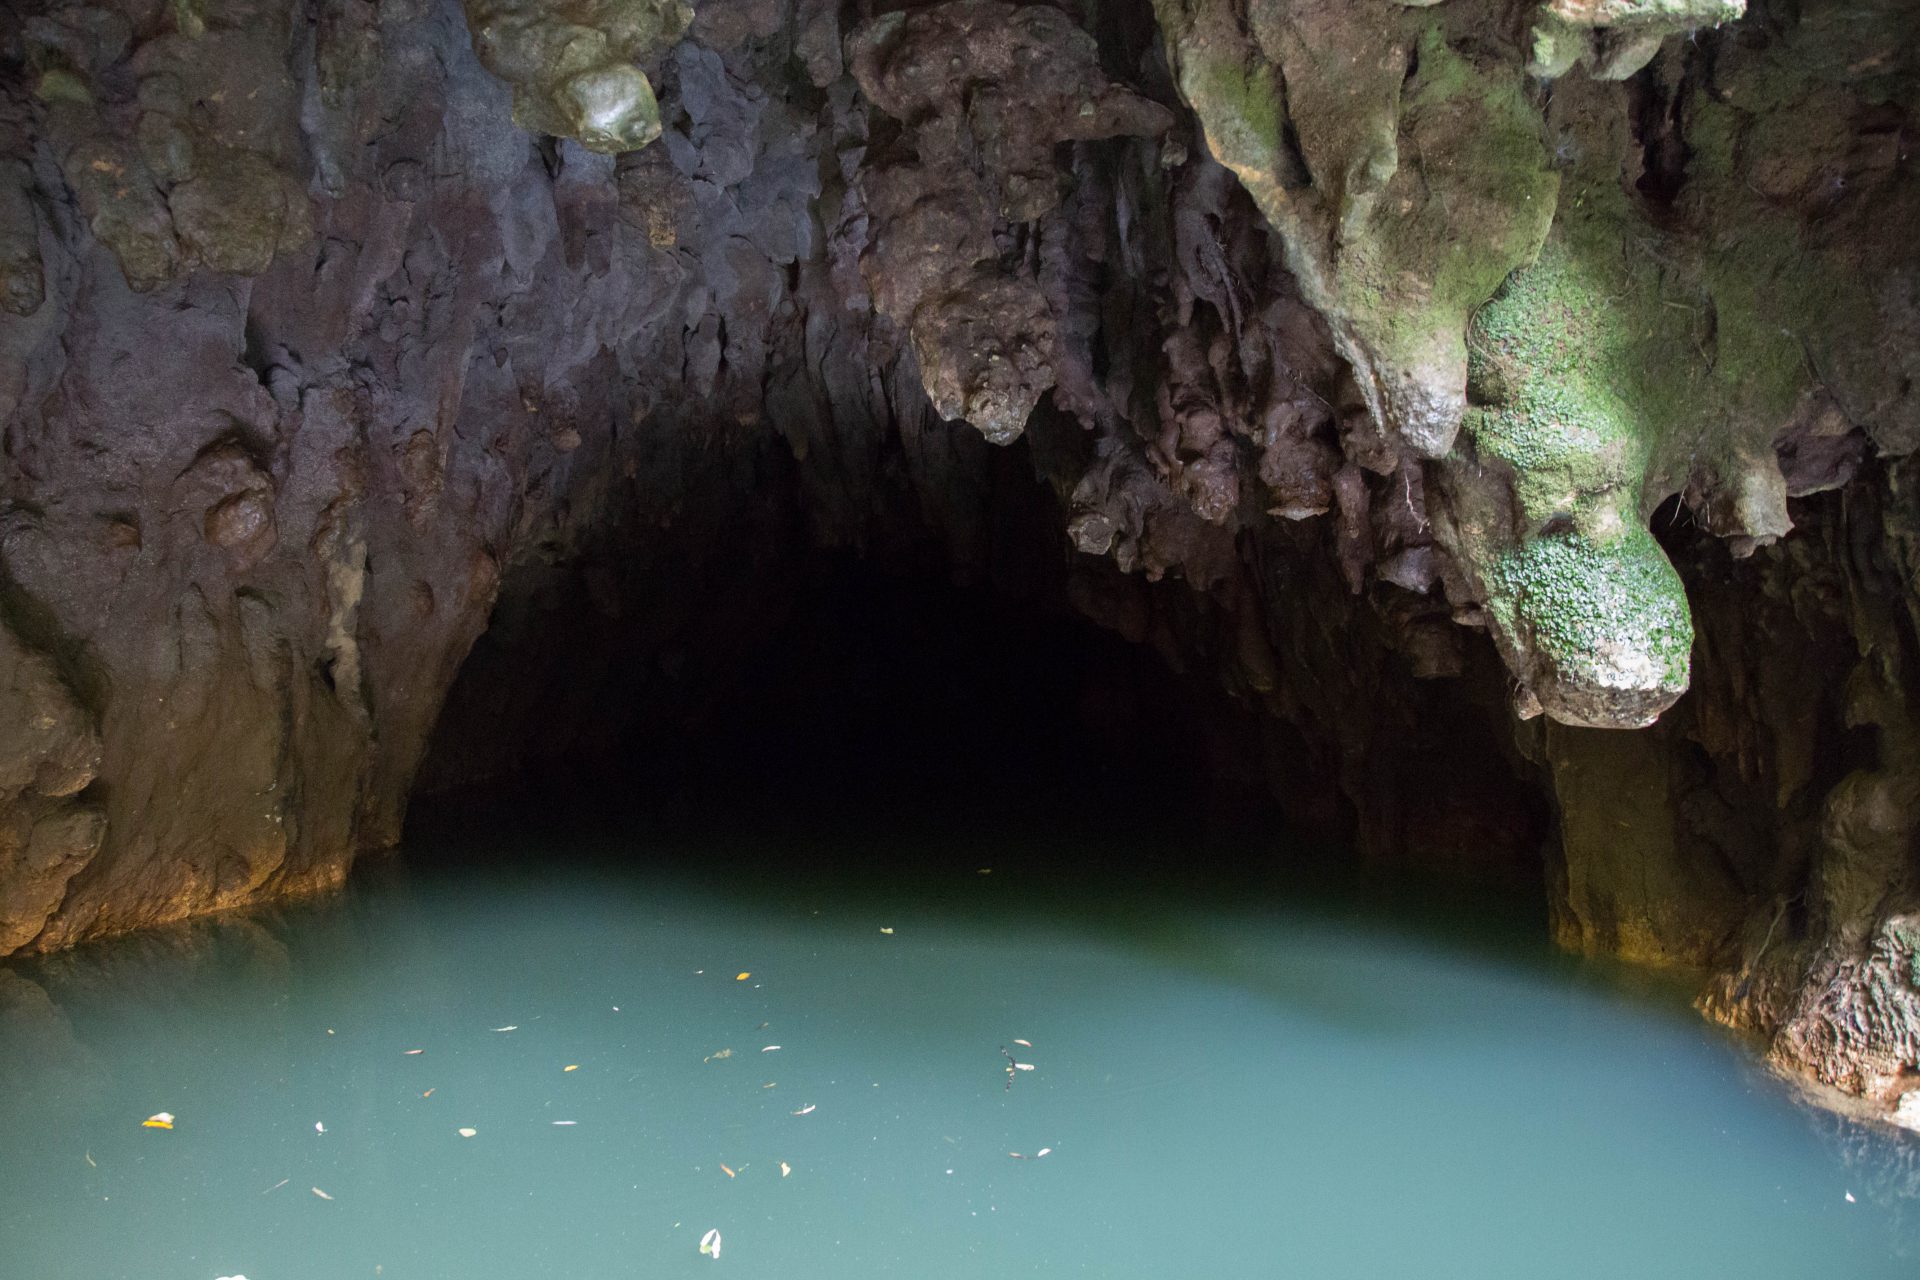 Waitomo Glowworm Caves, original entrance used by first discoverers in 1887